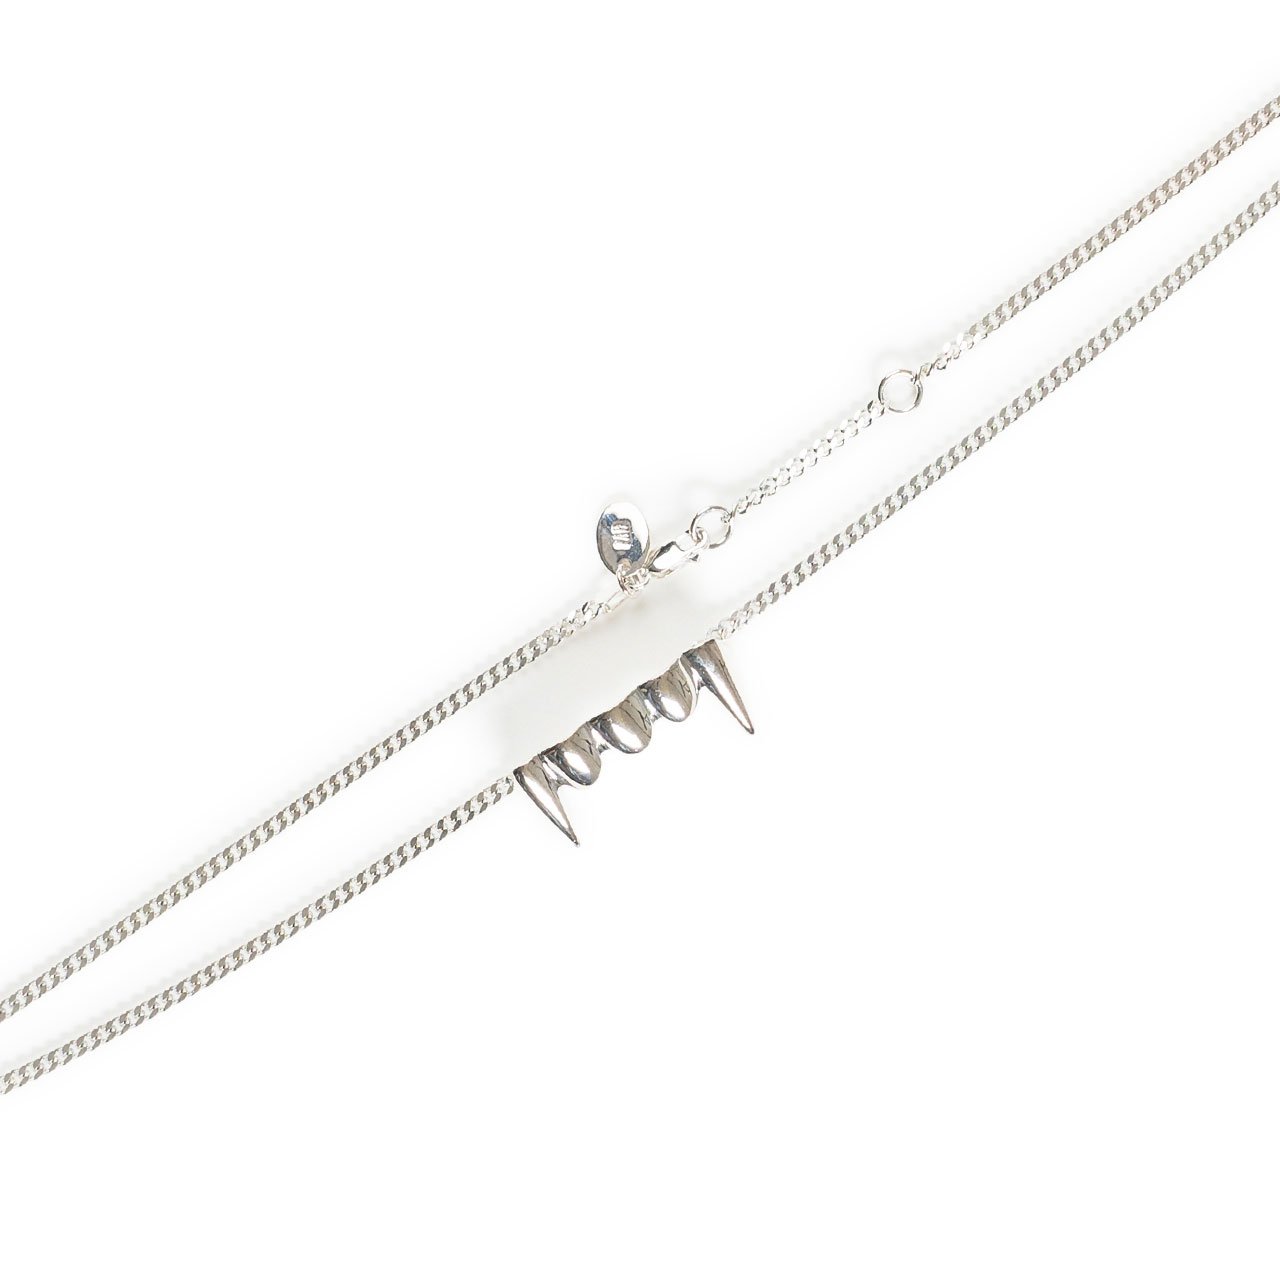 perks and mini s.loops original fang necklace (silver) - 9701-sv - a.plus - Image - 1